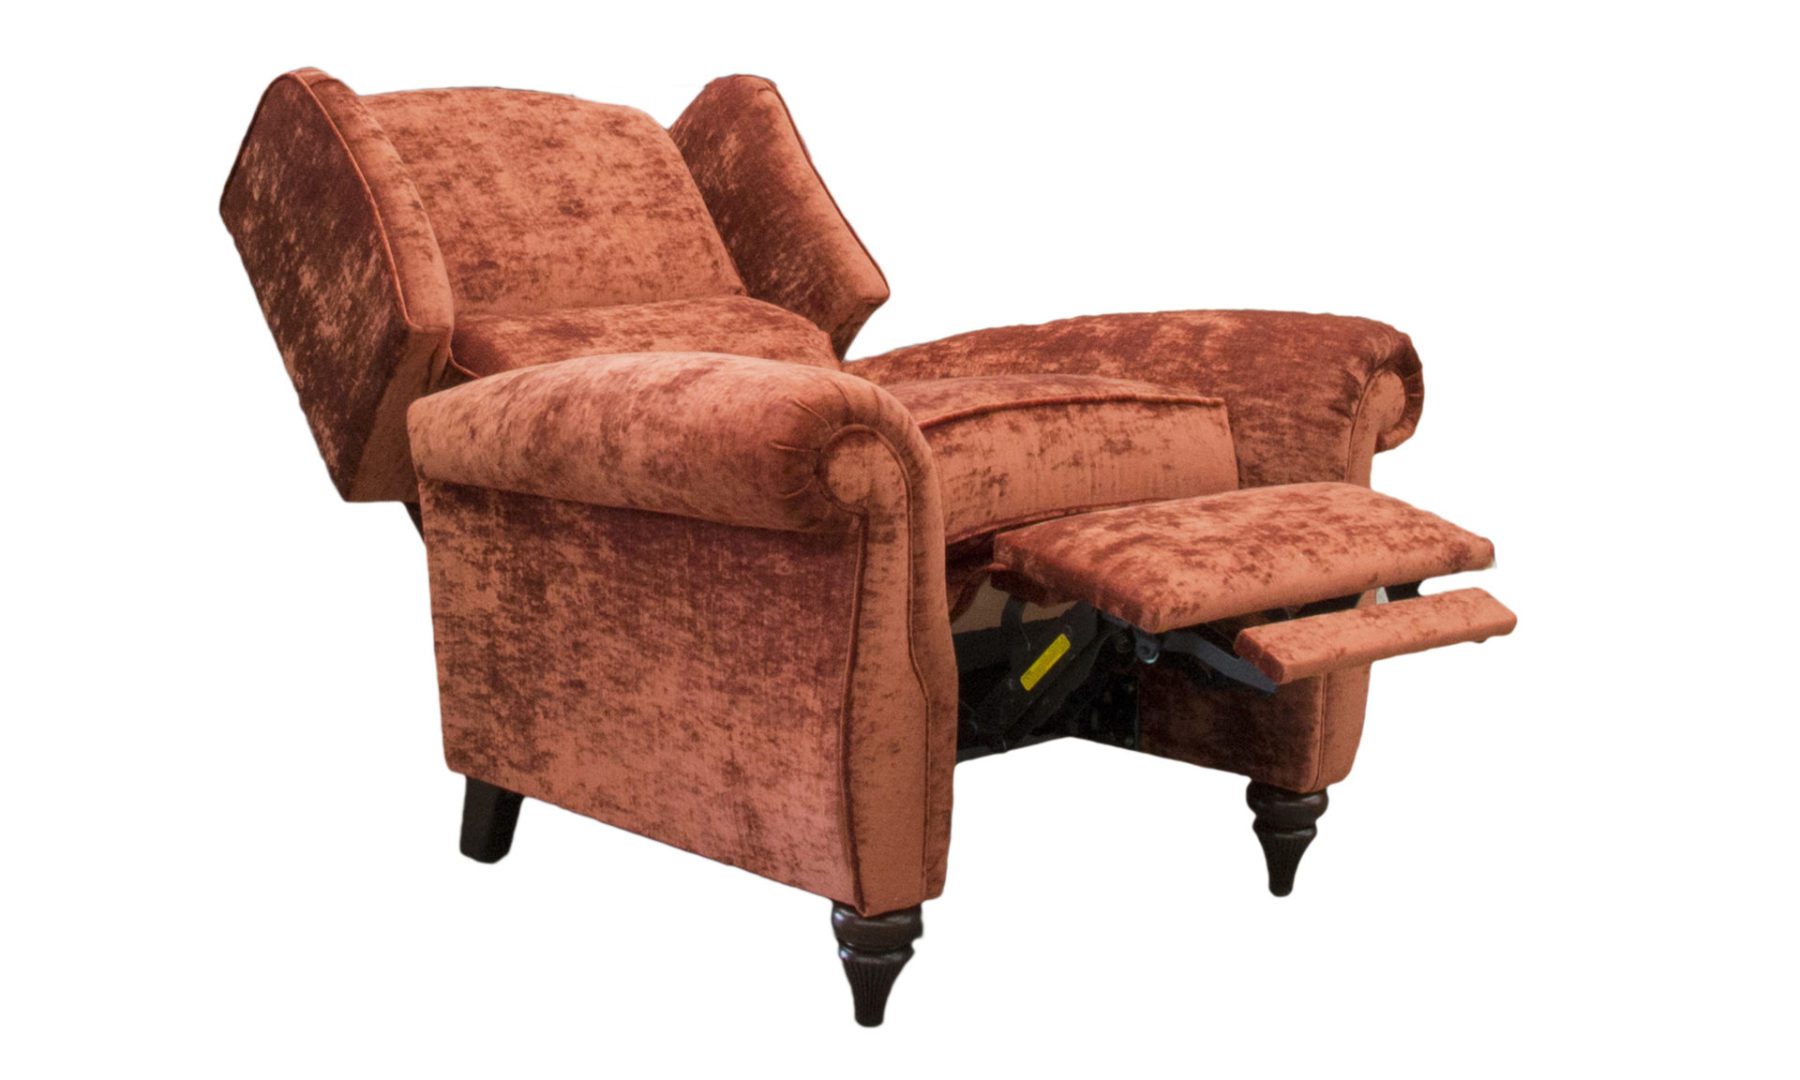 Greville Recliner Chair in JBrown Modena Terracotta 13105, Platinum Plus Collection Fabric